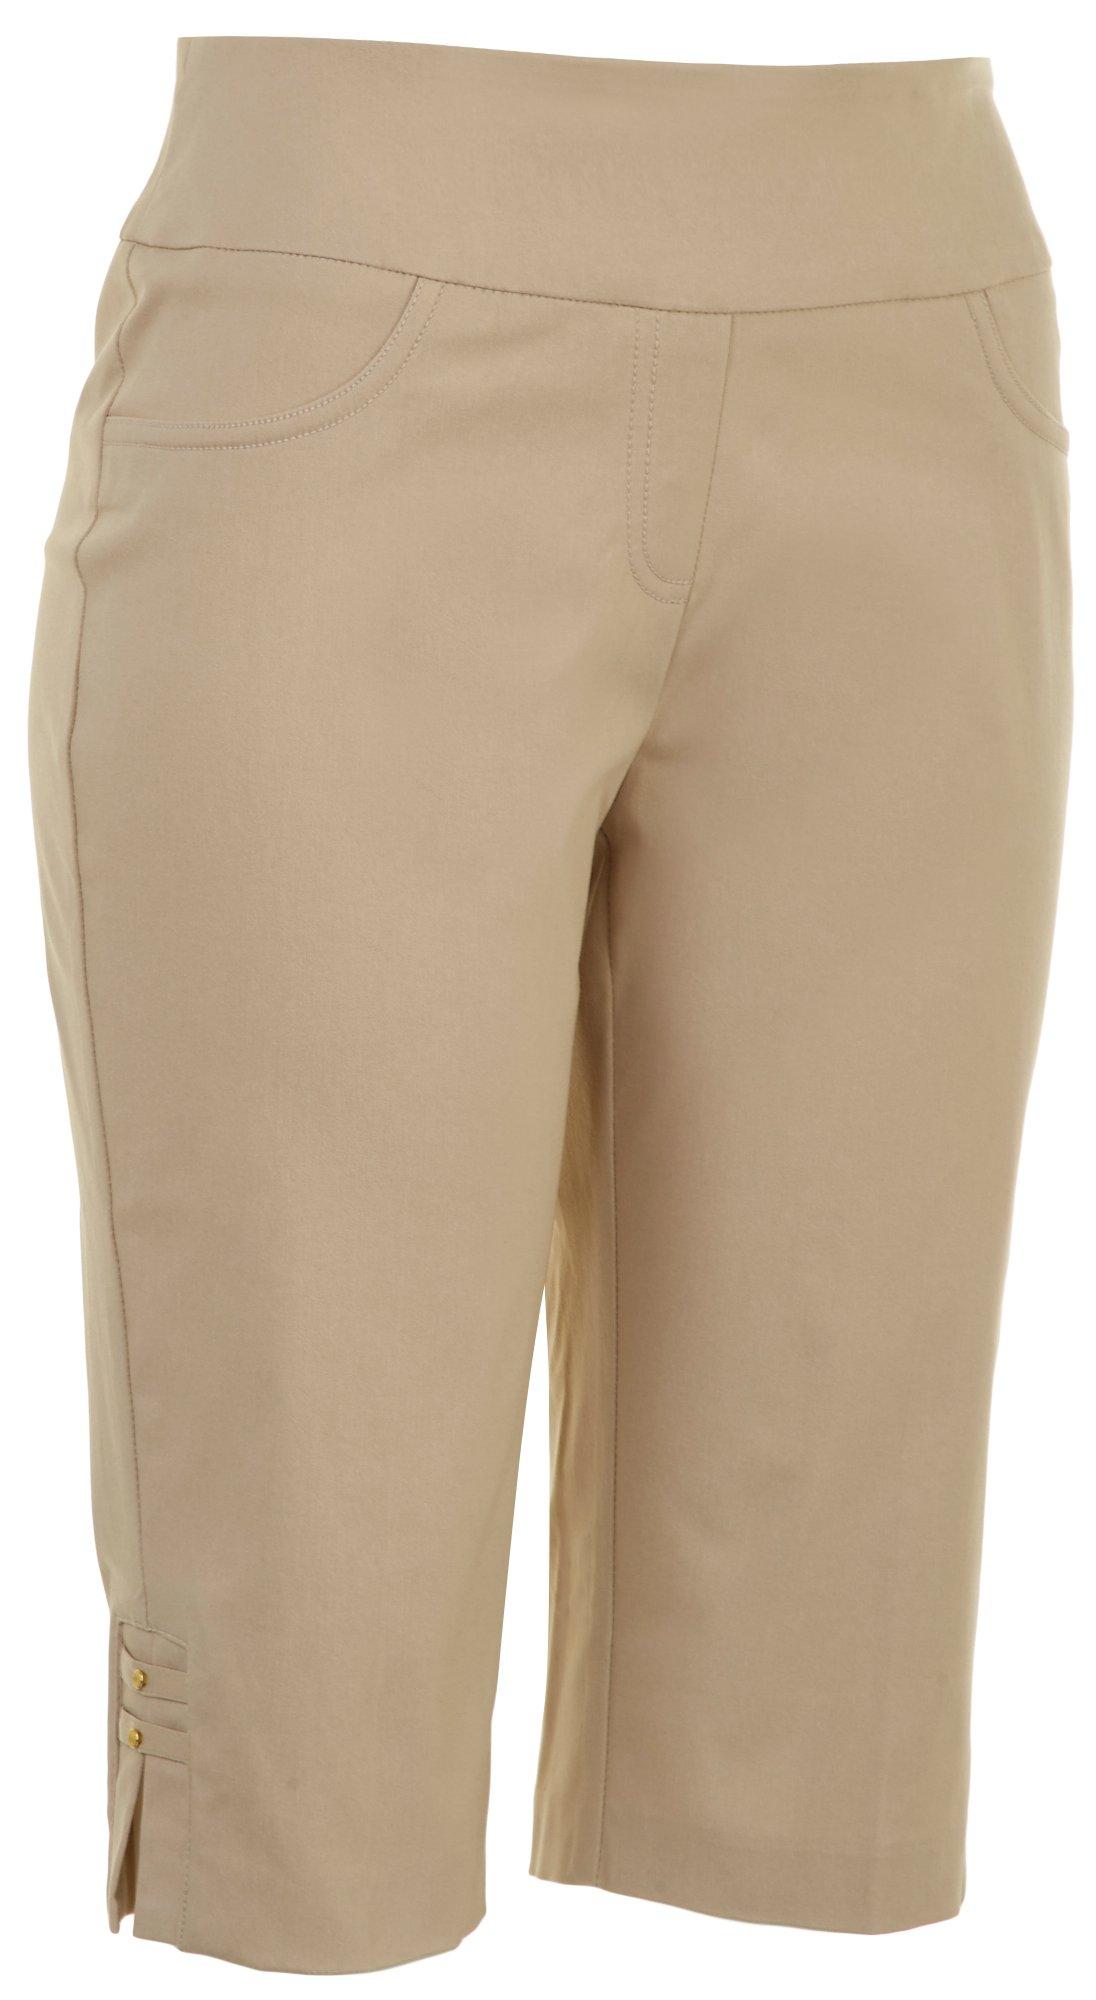 Womens Solid Skimmer Shorts